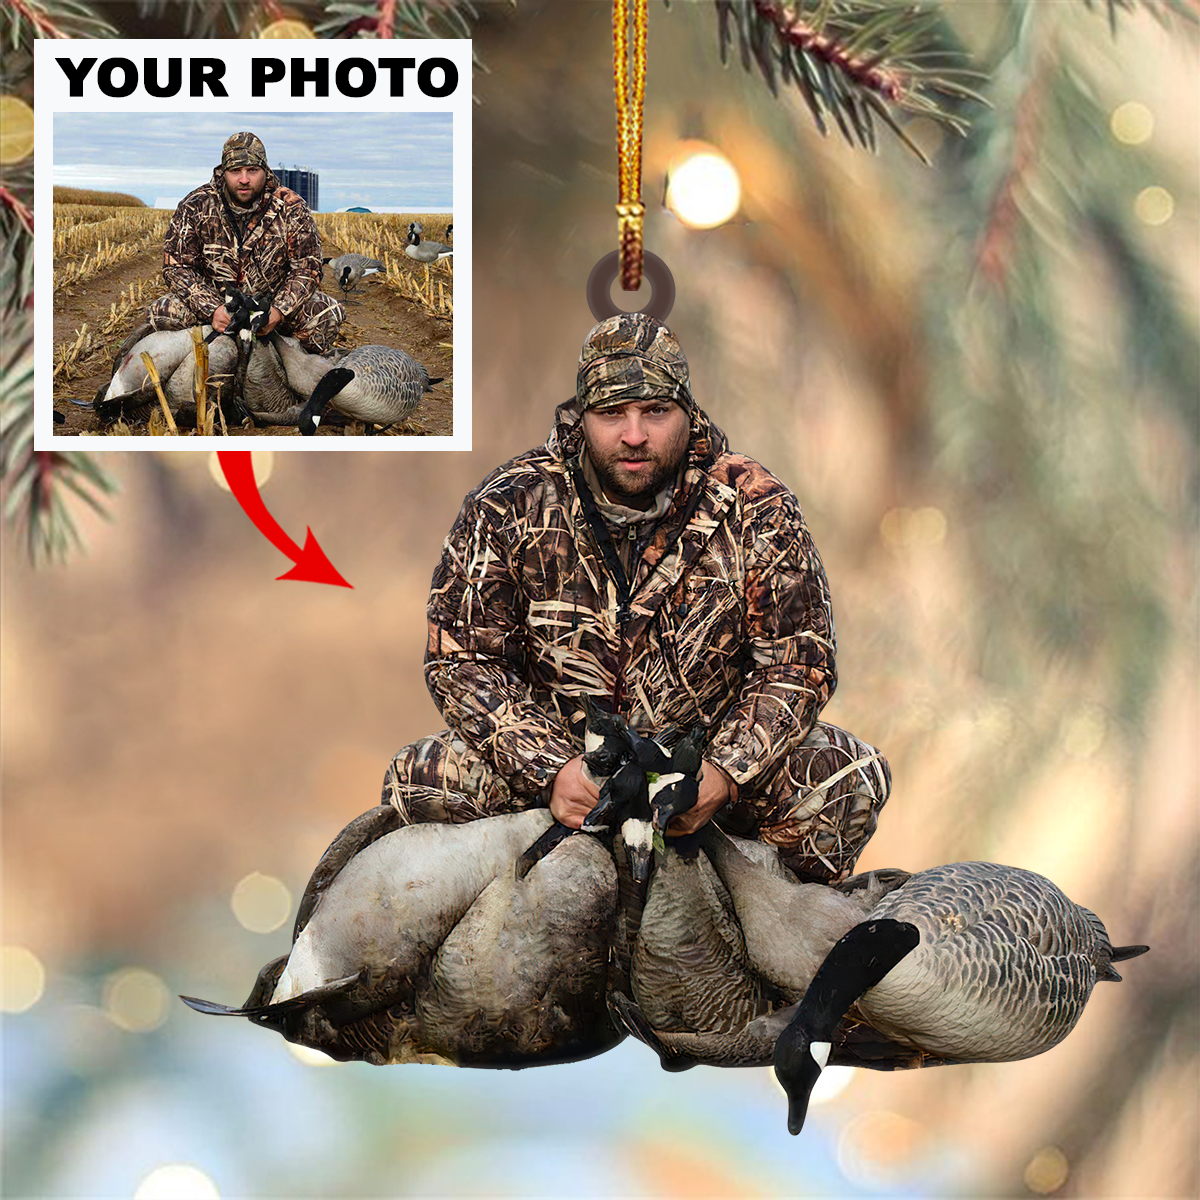 Custom Master Hunter Ornament - Personalized Photo Ornament - Christmas Gifts For Hunting Lover